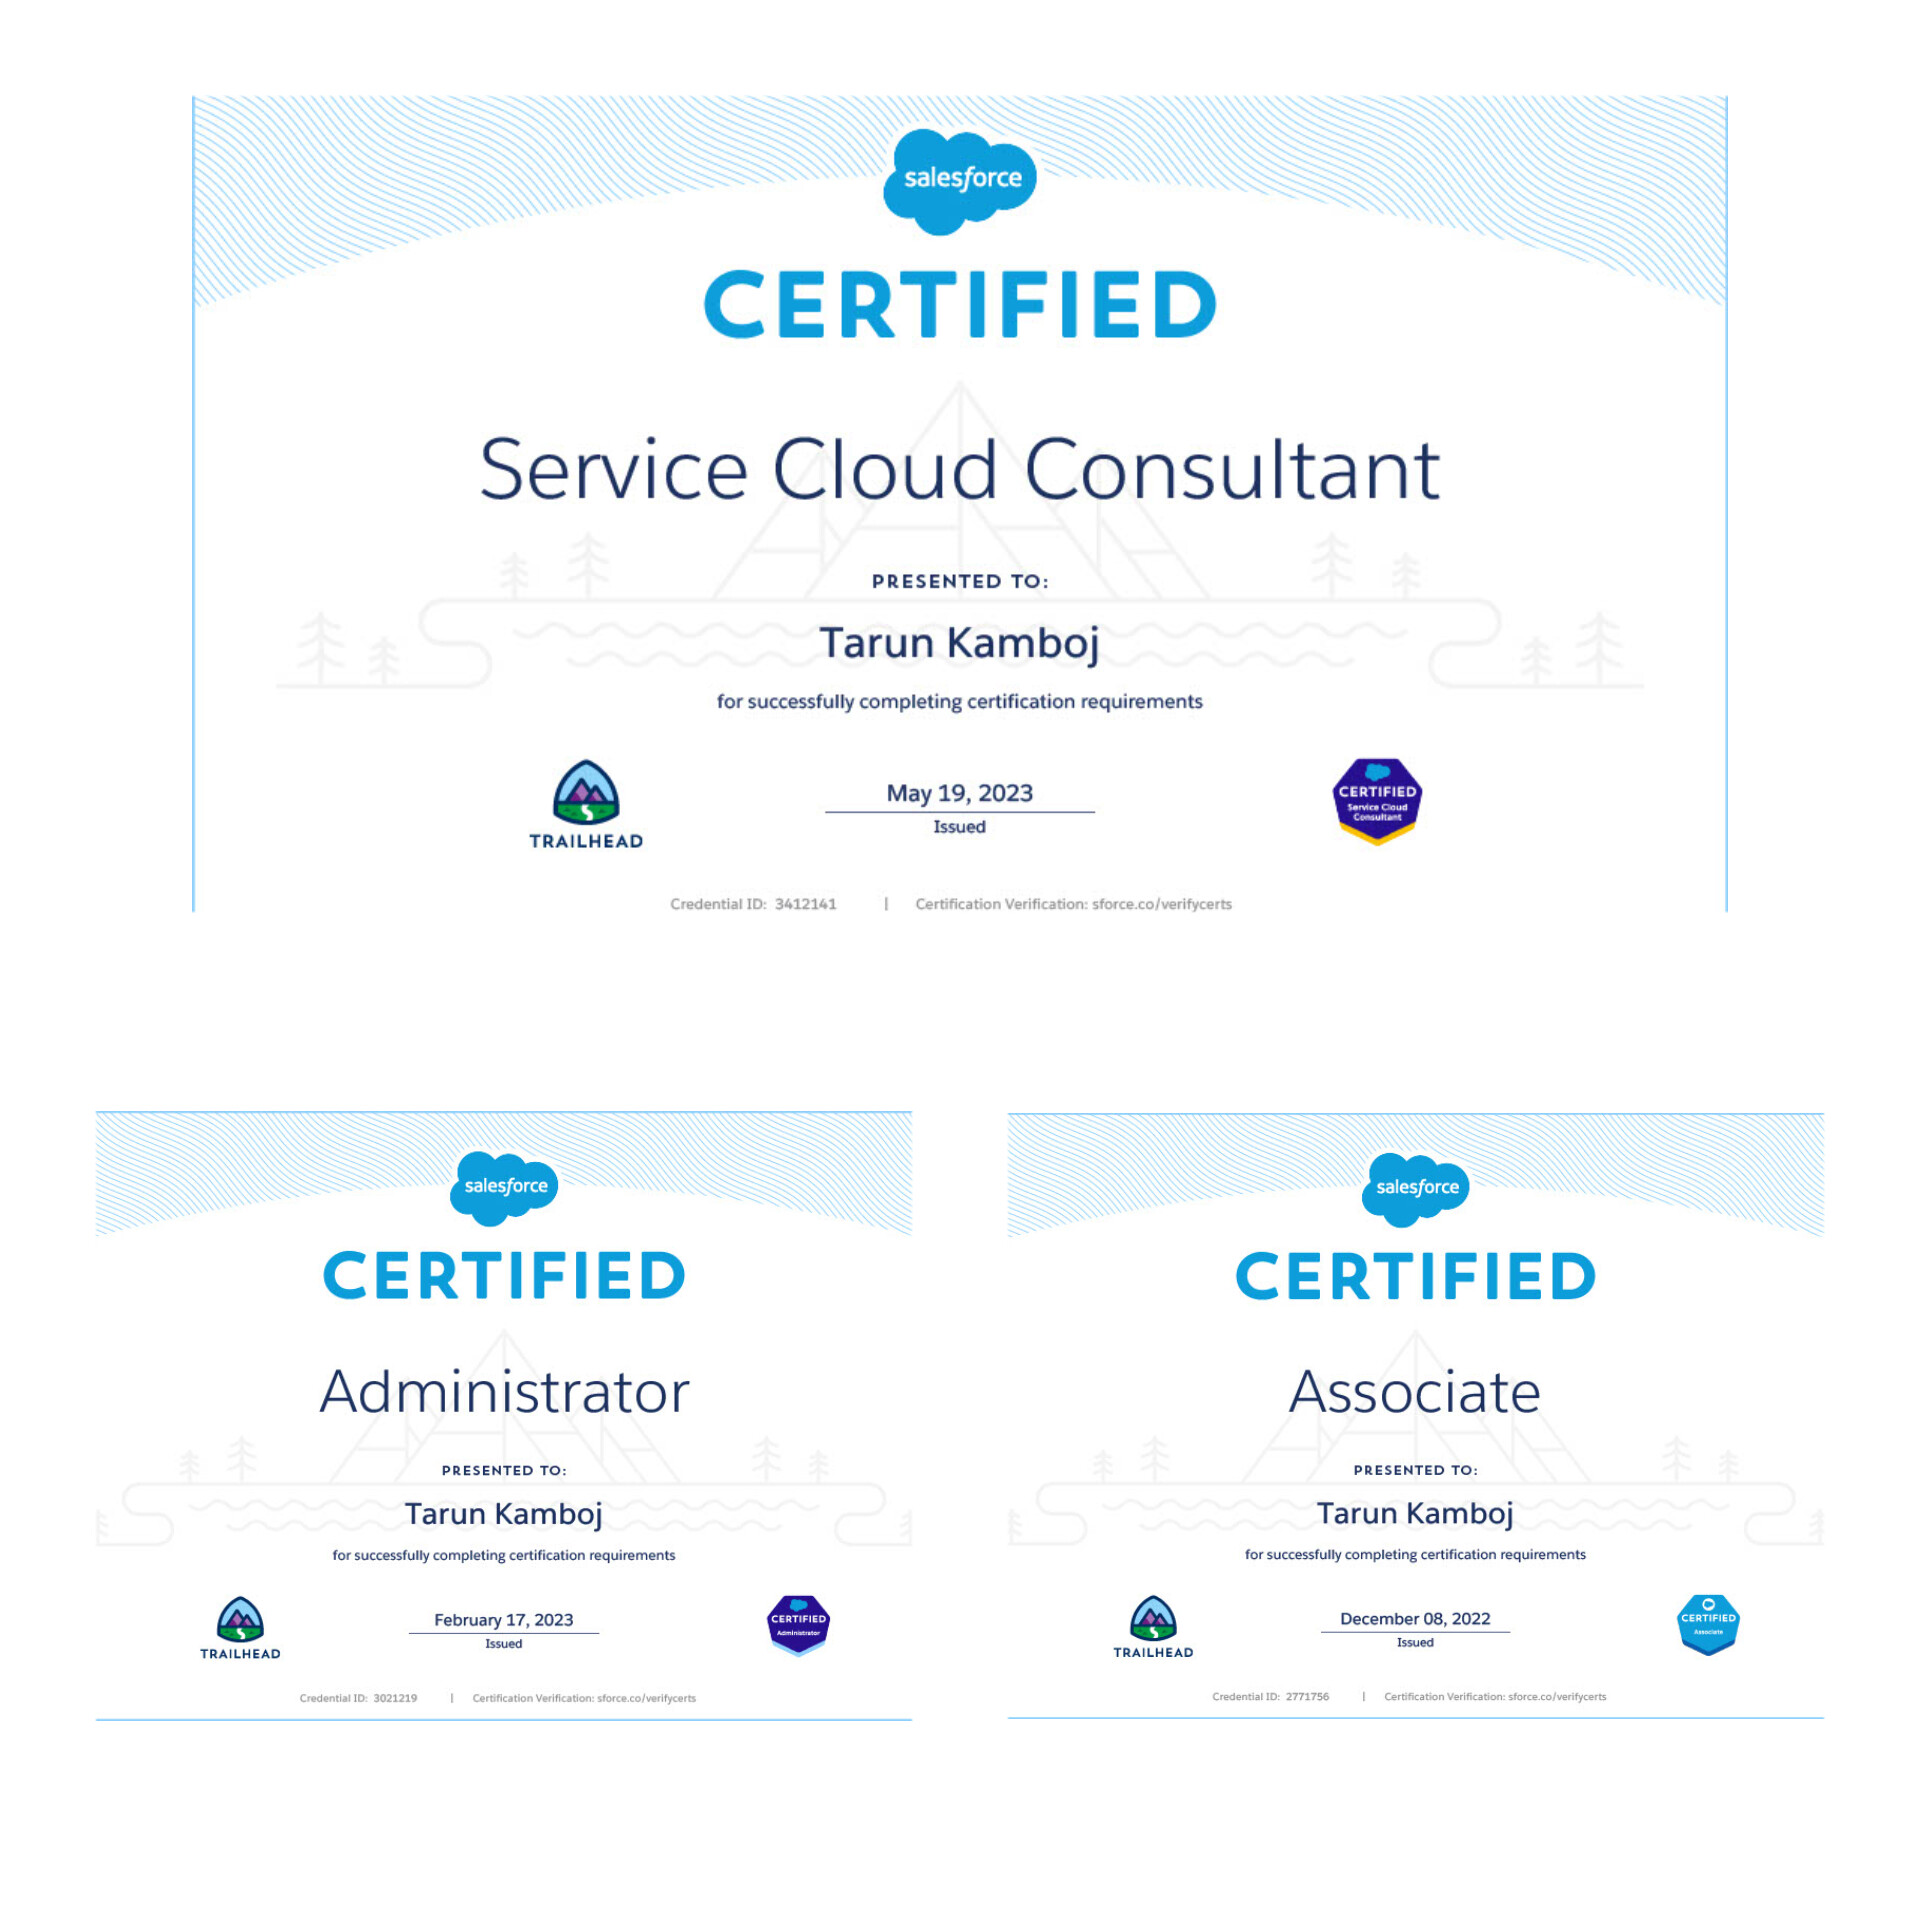 TRAILHEAD

CERTIFIED

Service Cloud Consultant

PRESENTED TO:

Tarun Kamboj

for successfully completing certification requirements

7 May 19, 2023 £55
Issued
TRAILHEAD

&amp; &amp;

CERTIFIED CERTIFIED

Administrator Associate
A AE TTT. ay AN
Tarun Kamboj Tarun Kamboj
ey ei— C2 EO TTT ena

TRAILHEAD